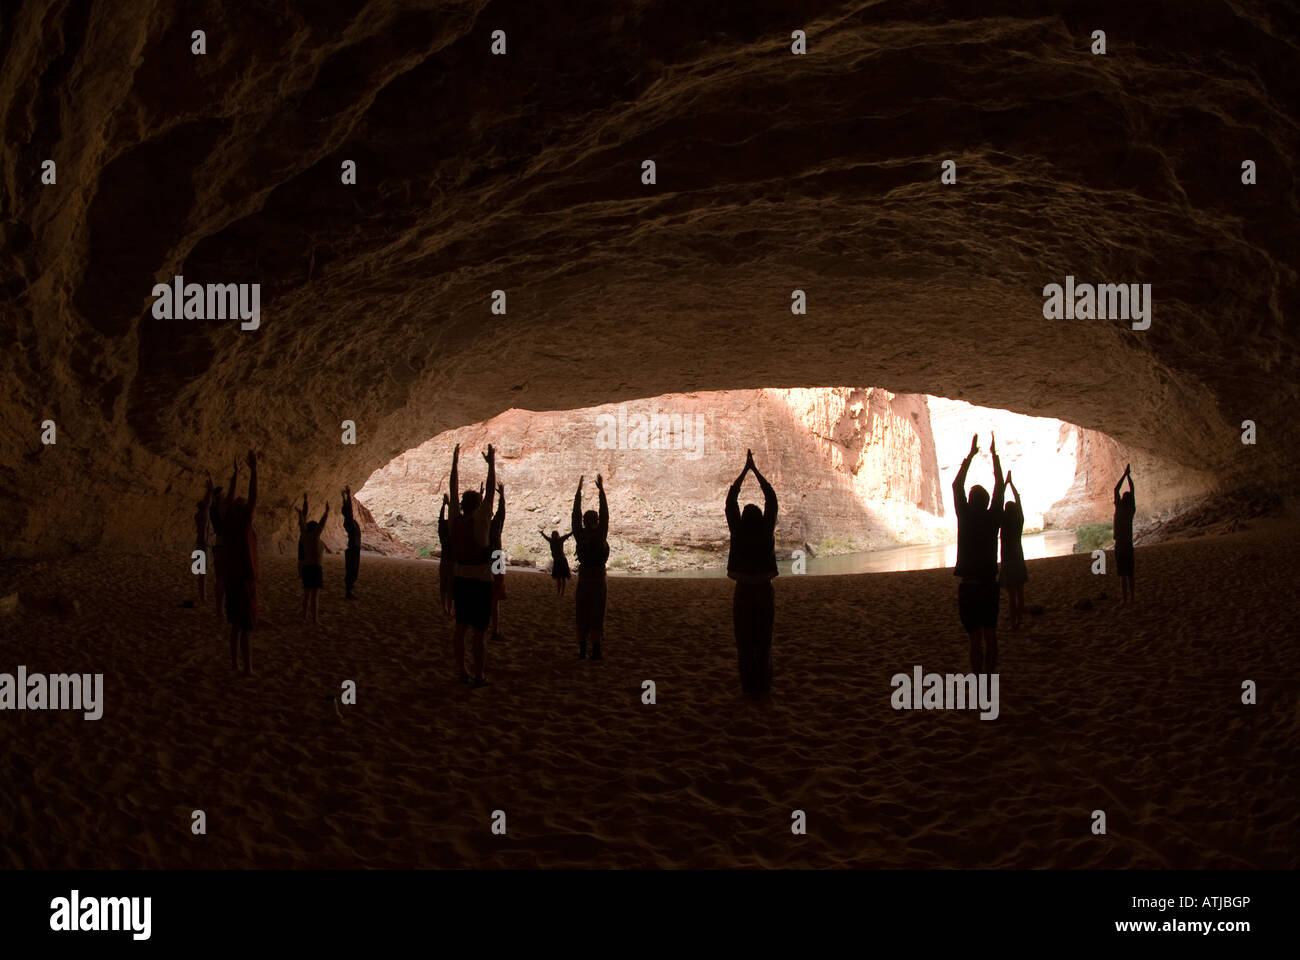 Group doing Yoga in Redwall Cavern on the Colorado River in the Grand Canyon National Park Arizona Stock Photo